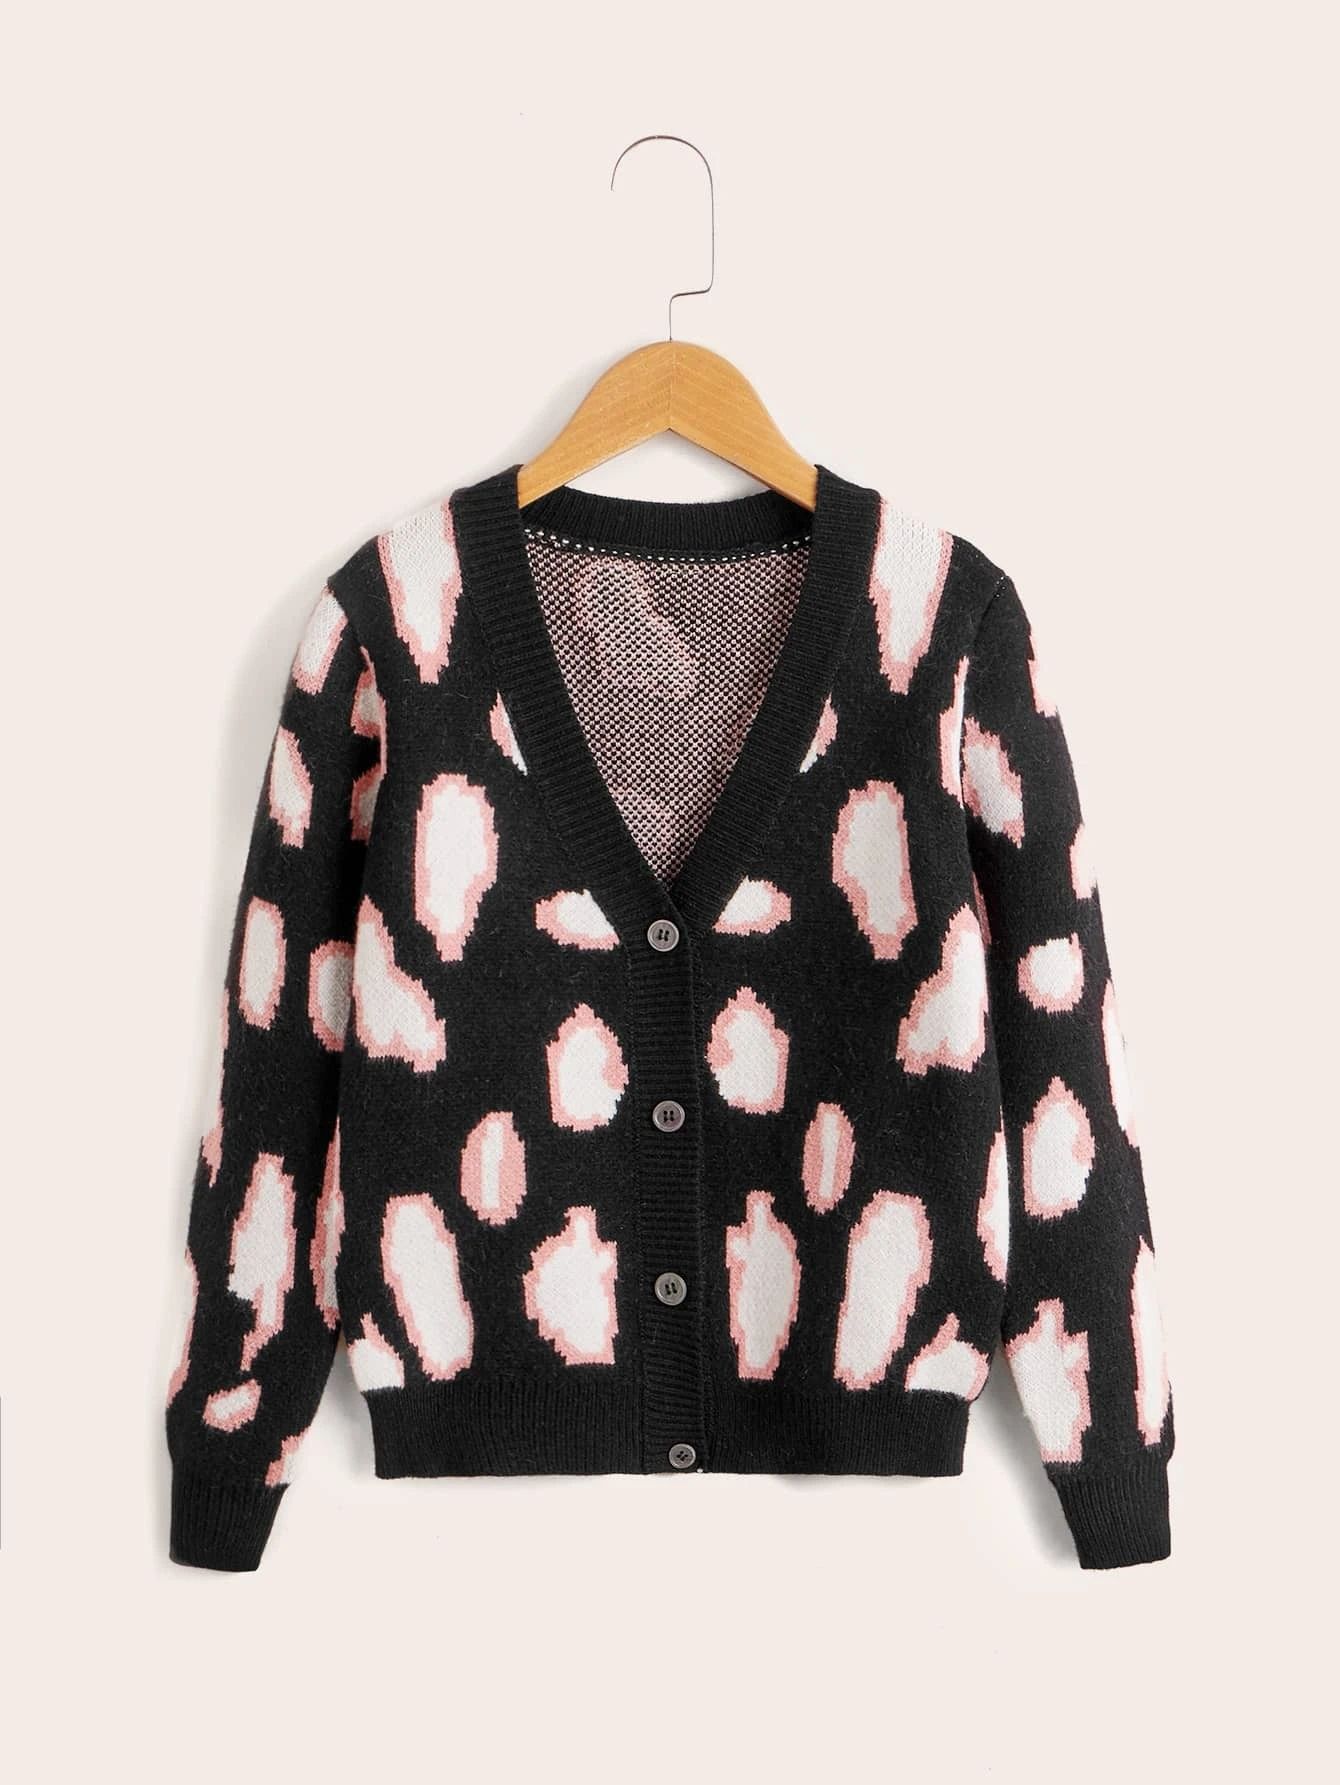 Girls All Over Print Button Up Cardigan | SHEIN